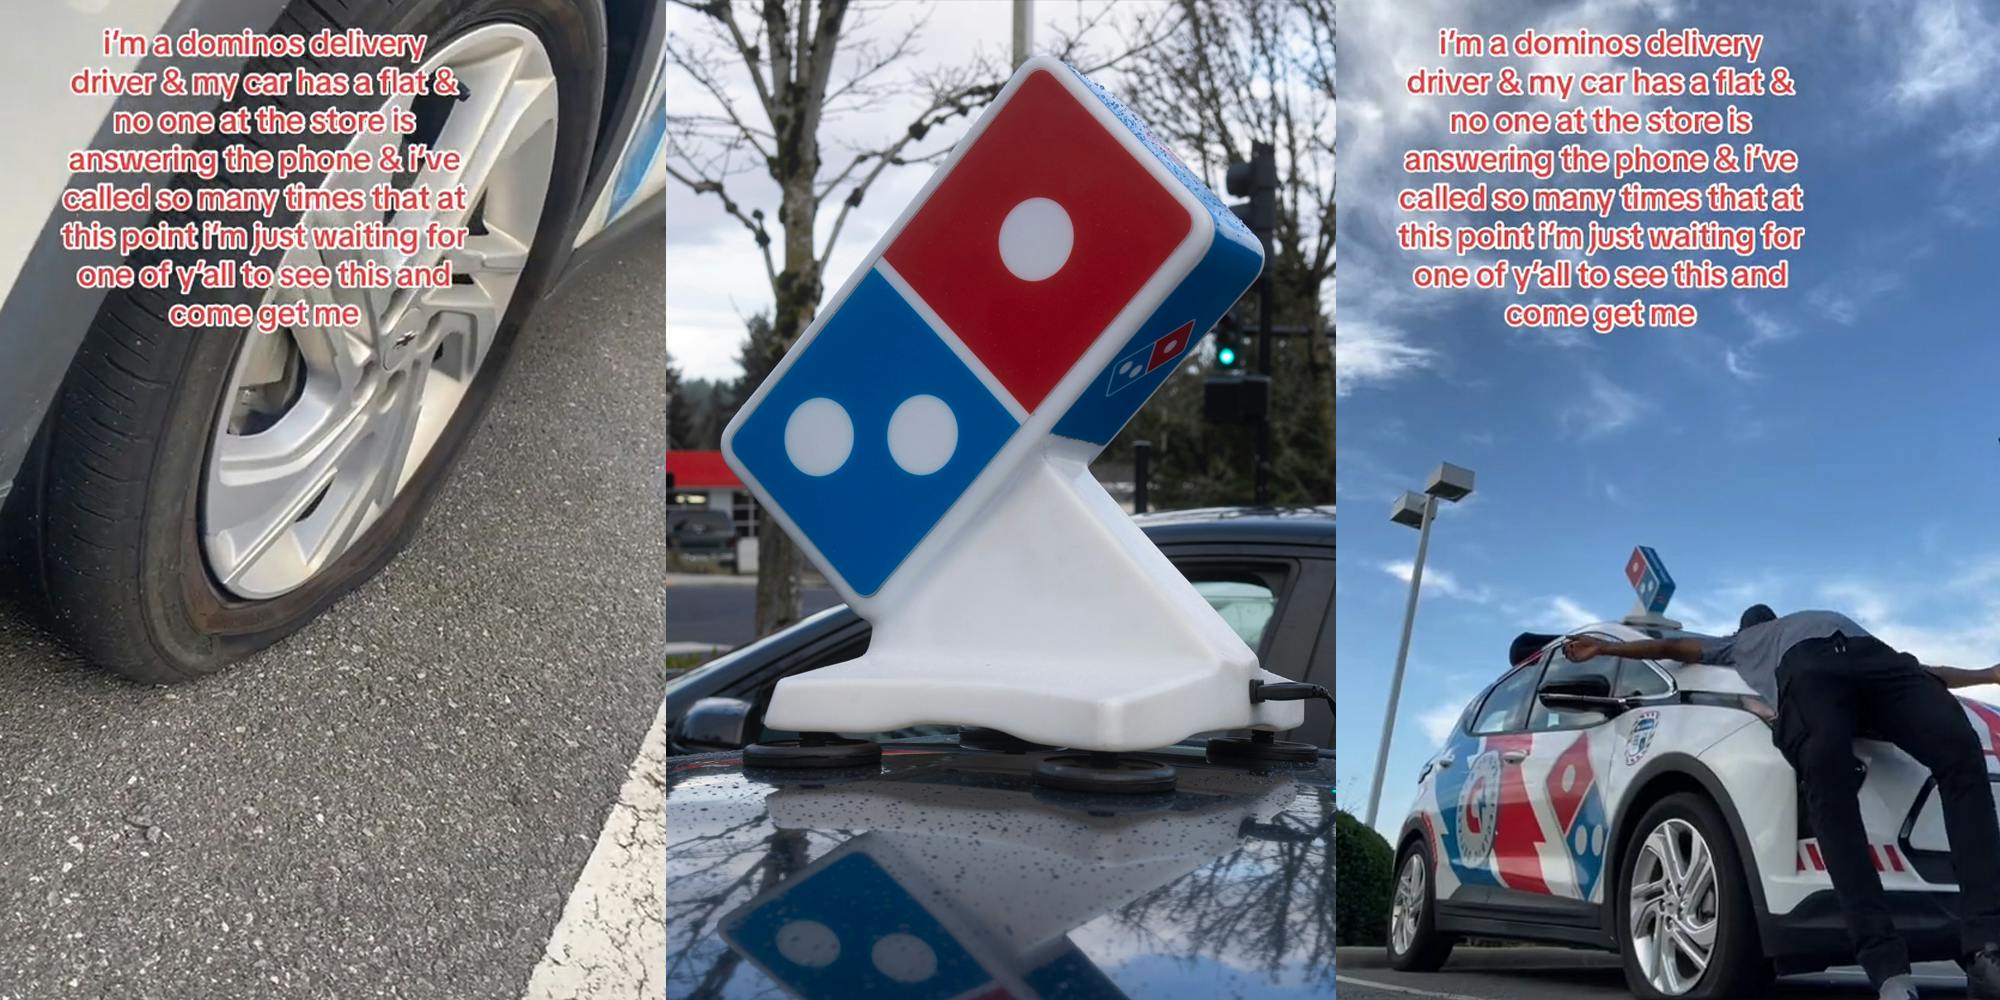 Domino's car with flat tire with caption "i'm a domino's delivery driver & my car has a flat & no one at the store is answering the phone & i've called so many times that at this point i'm just waiting for one of y'all to see this and come get me" (l) Domino's car with sign on top (c) Domino's worker on car with flat tire with caption "i'm a domino's delivery driver & my car has a flat & no one at the store is answering the phone & i've called so many times that at this point i'm just waiting for one of y'all to see this and come get me" (r)